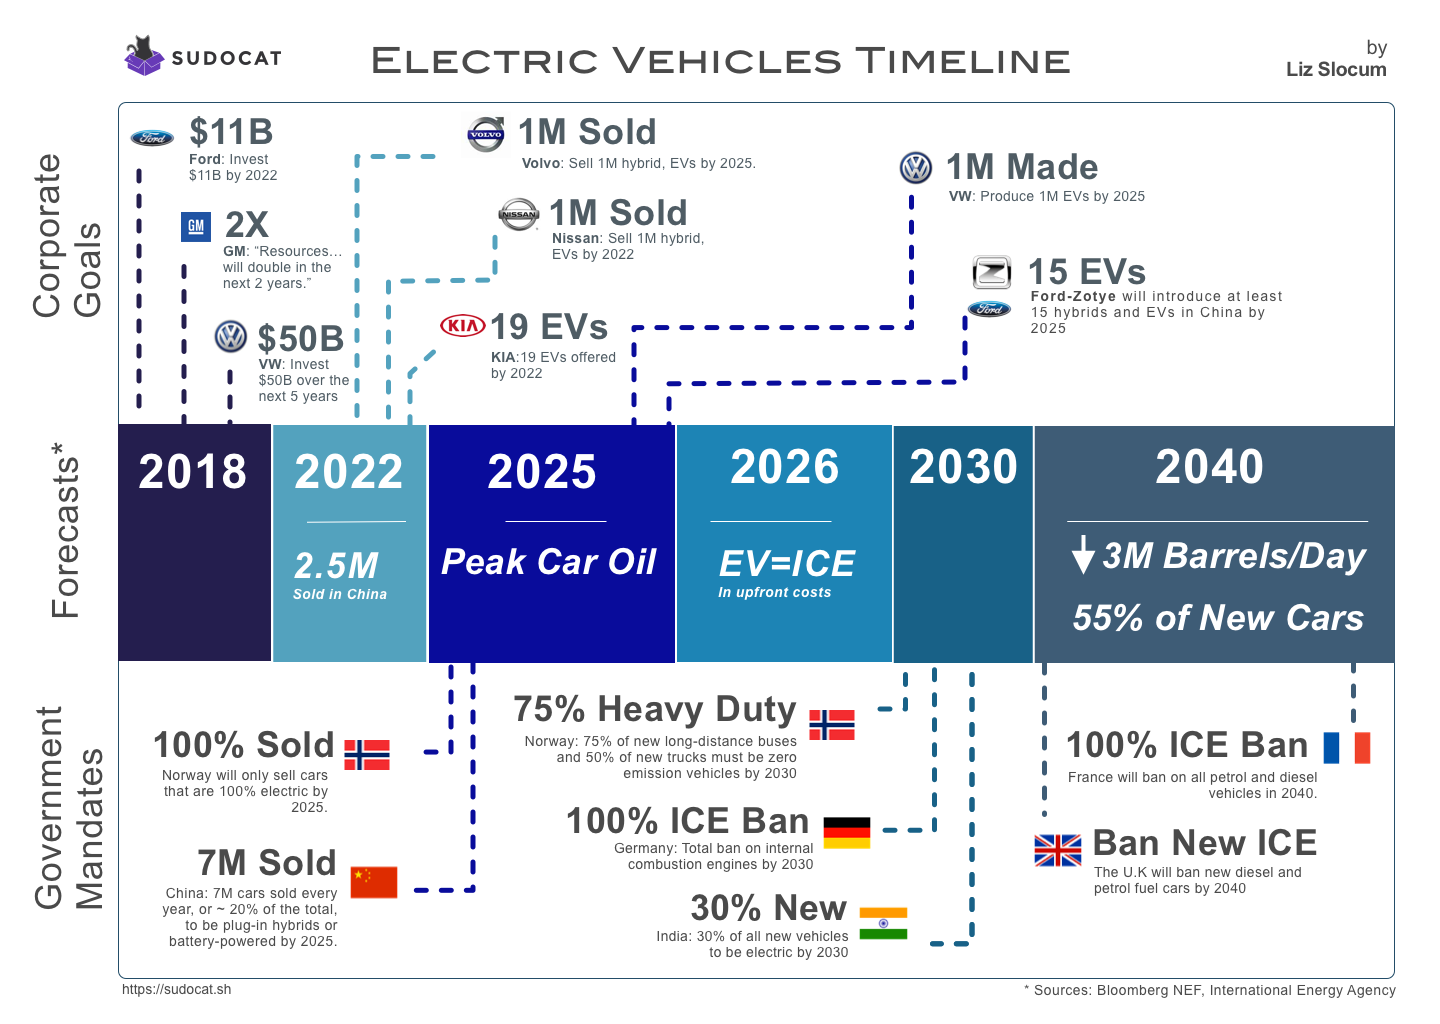 Electric Vehicles Timeline: 2018 - 2040